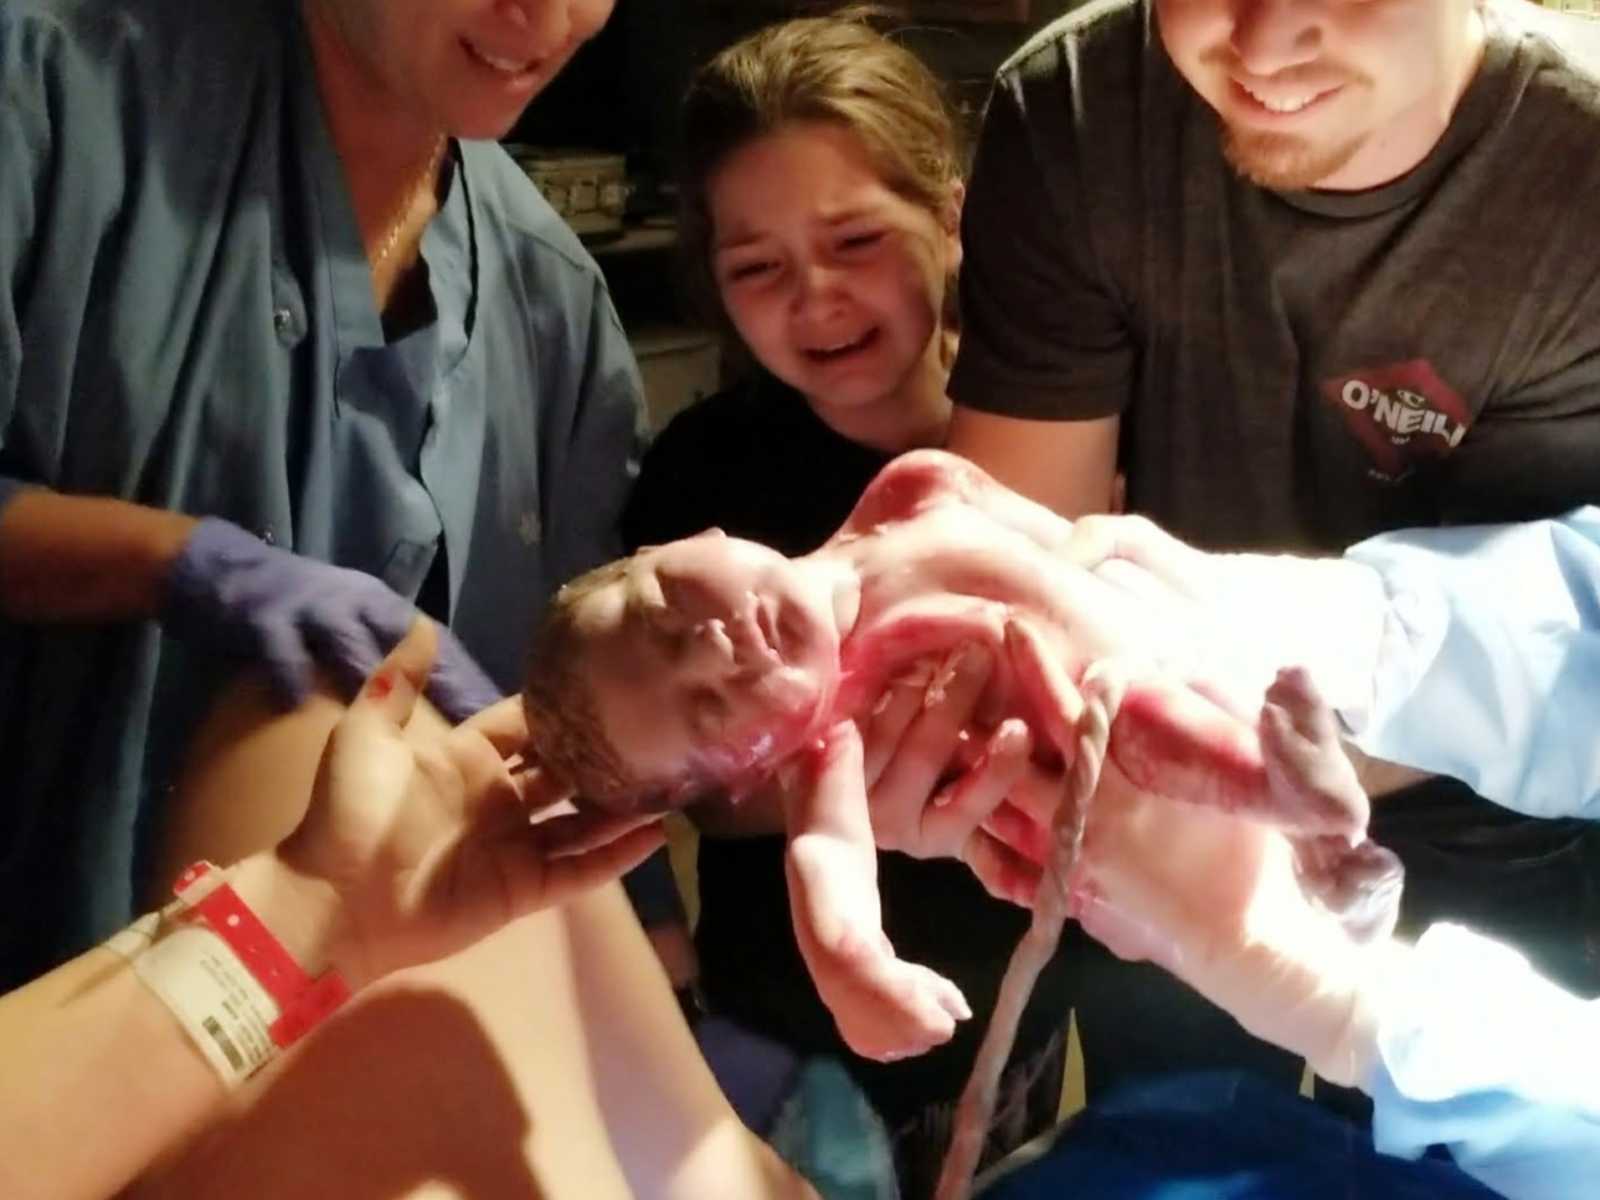 newborn baby with umbilical chord still attached is held in air by nurses with help of dad and sister crying in background